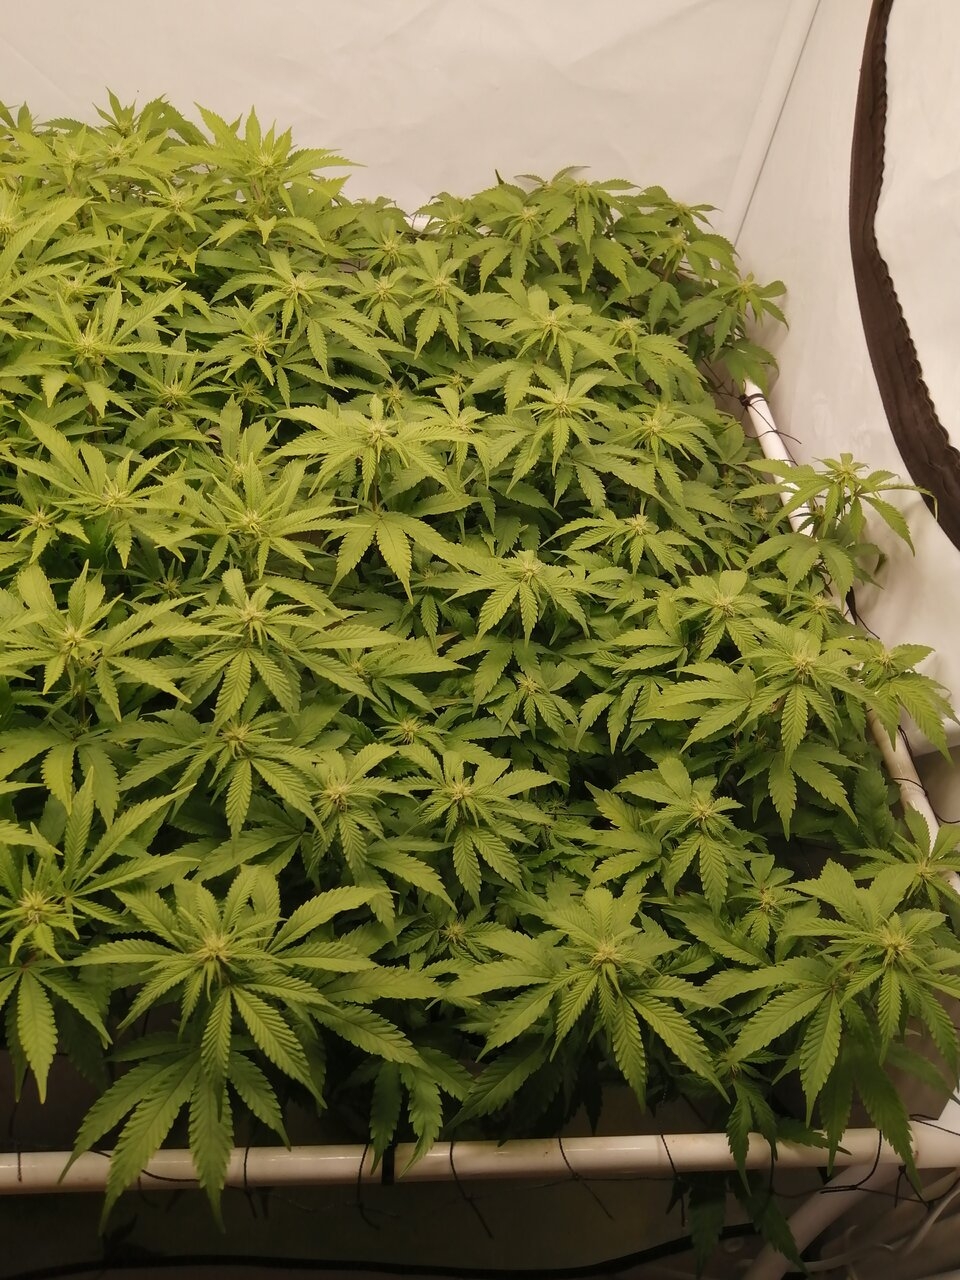 Cheese By Seedsman - Day 15 Of Flower